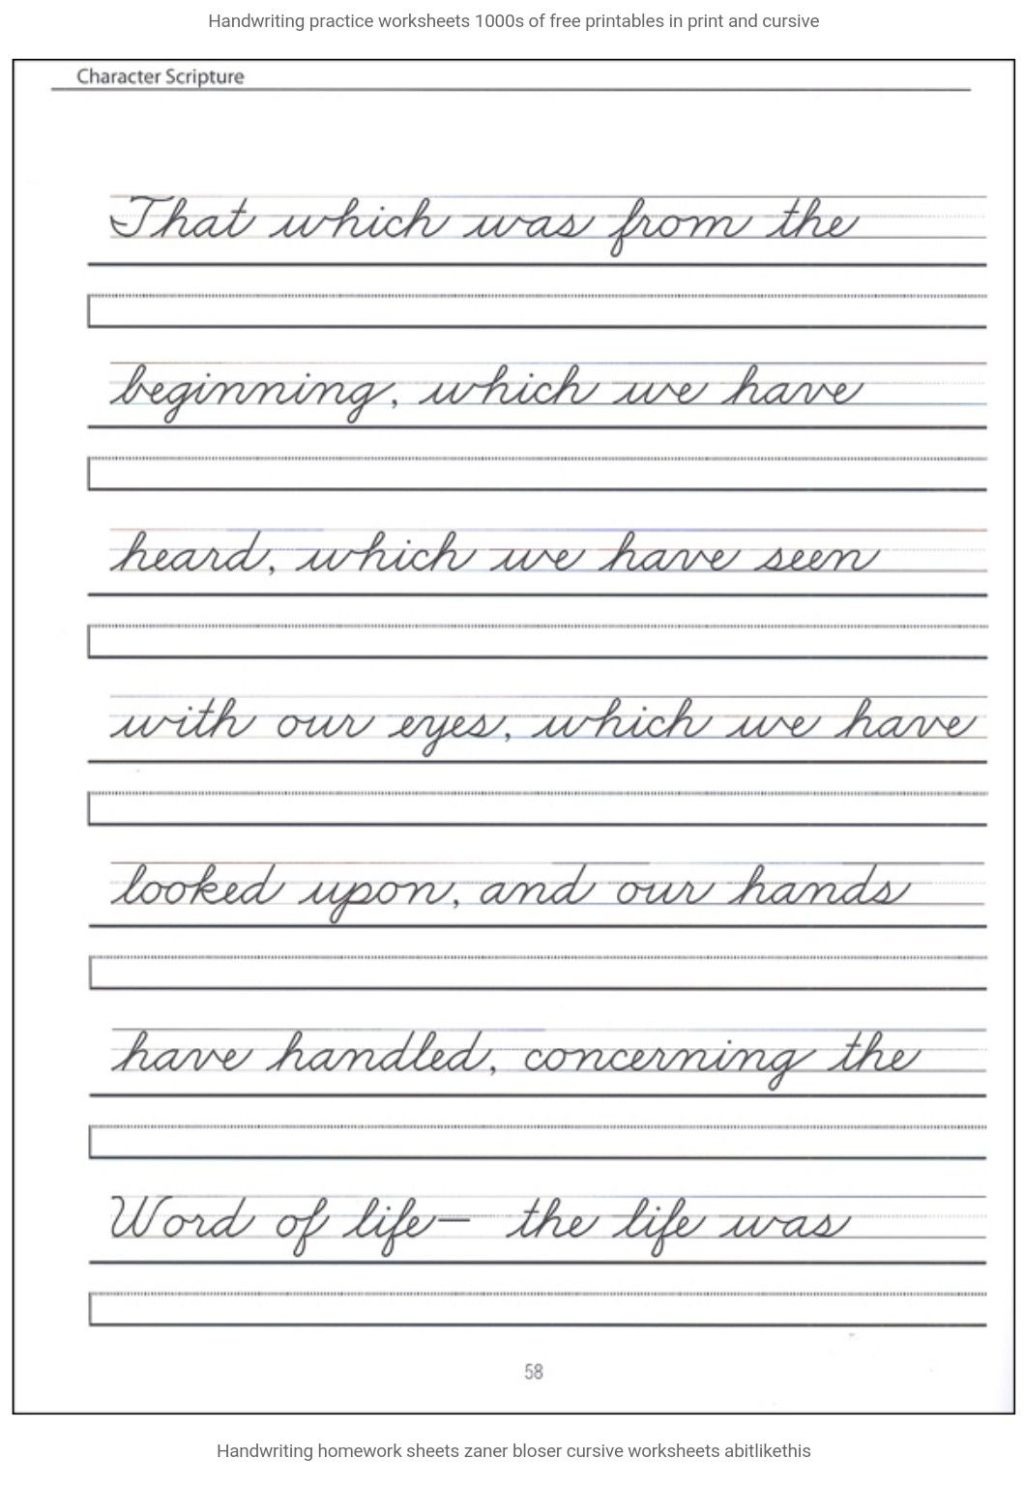 printable-daily-handwriting-practice-adults-worksheets-goodworksheets